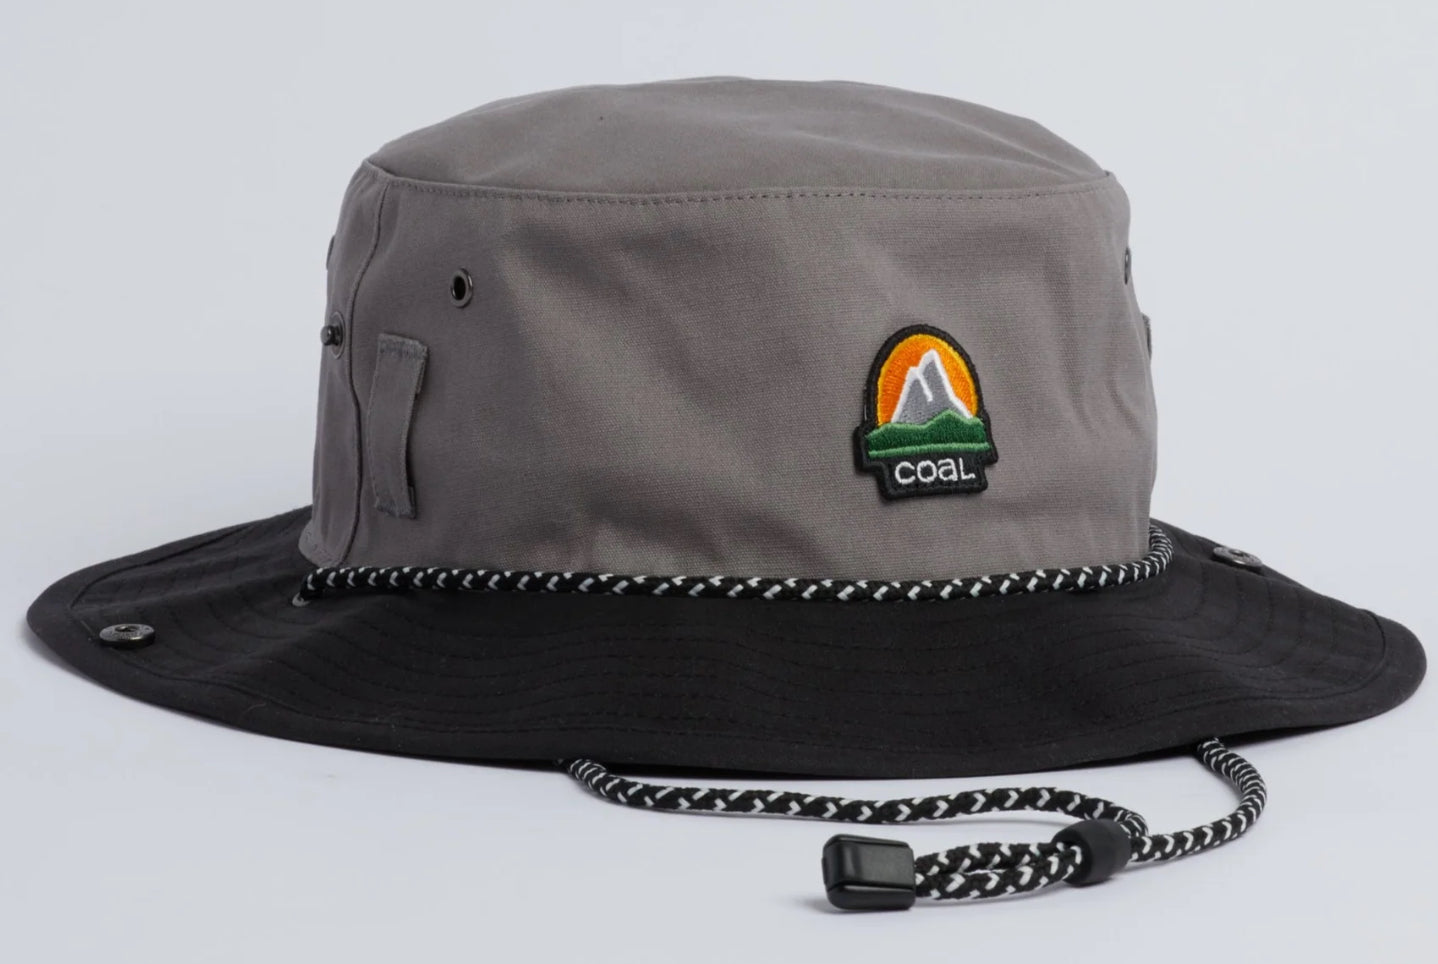 Coal - The Seymour - Waxed Canvas Boonie Hat